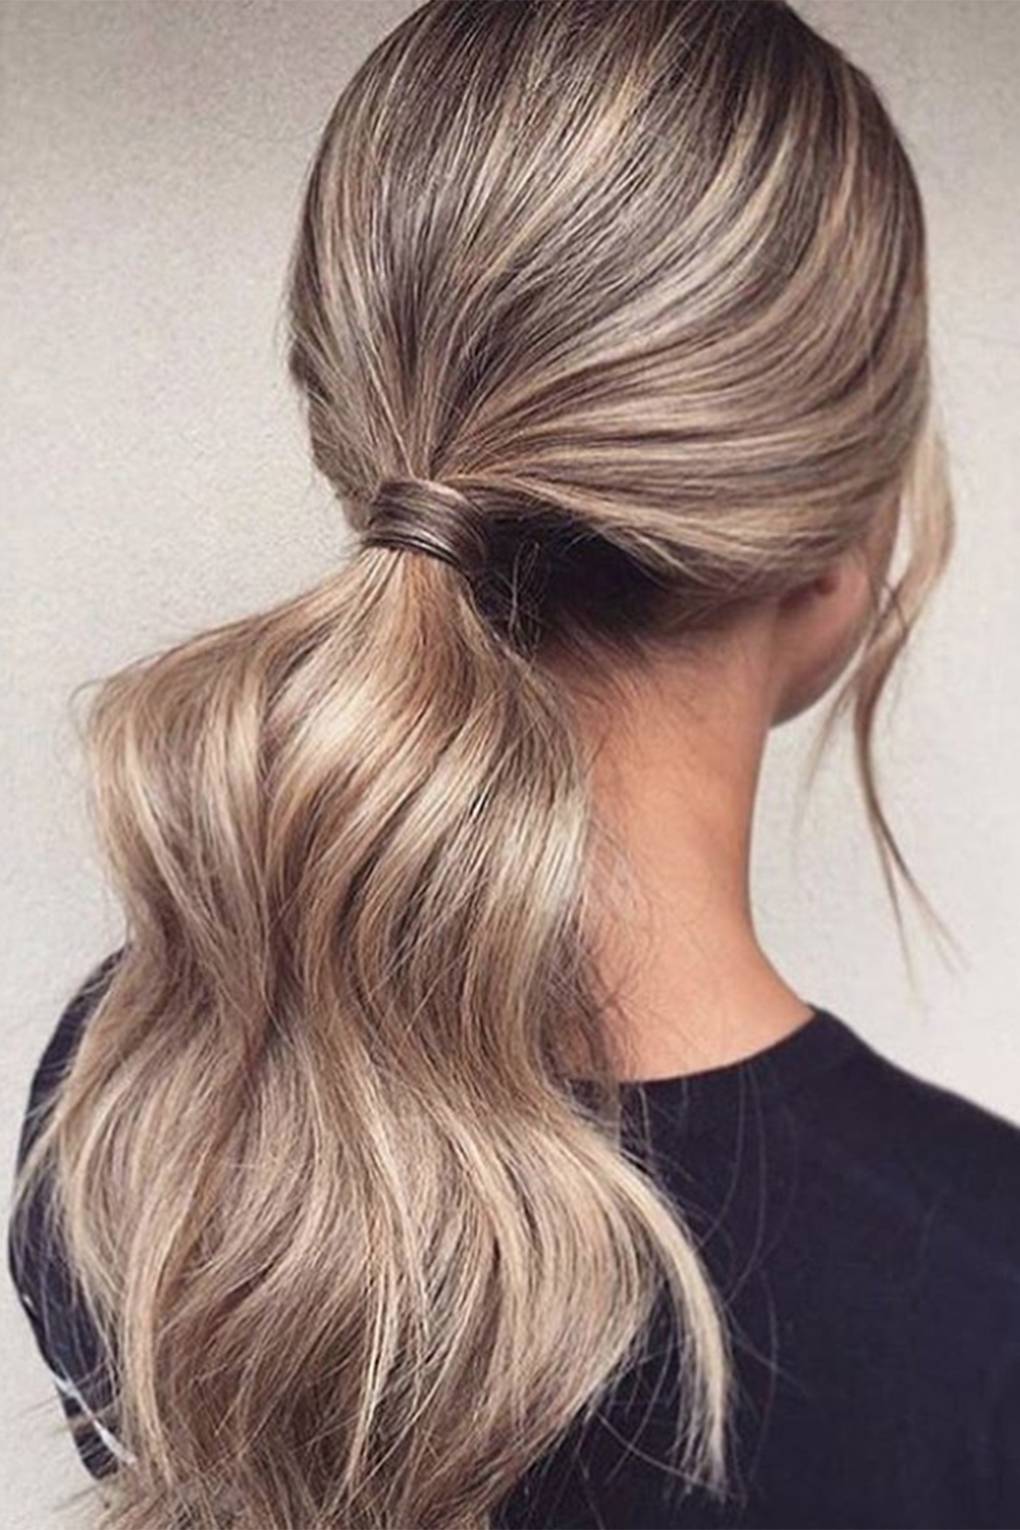 Hairstyles For Long Hair Long Hair Trends Ideas Tips 2020 Glamour Uk At hsh you can find tutorials and anything your hair needs. hairstyles for long hair long hair